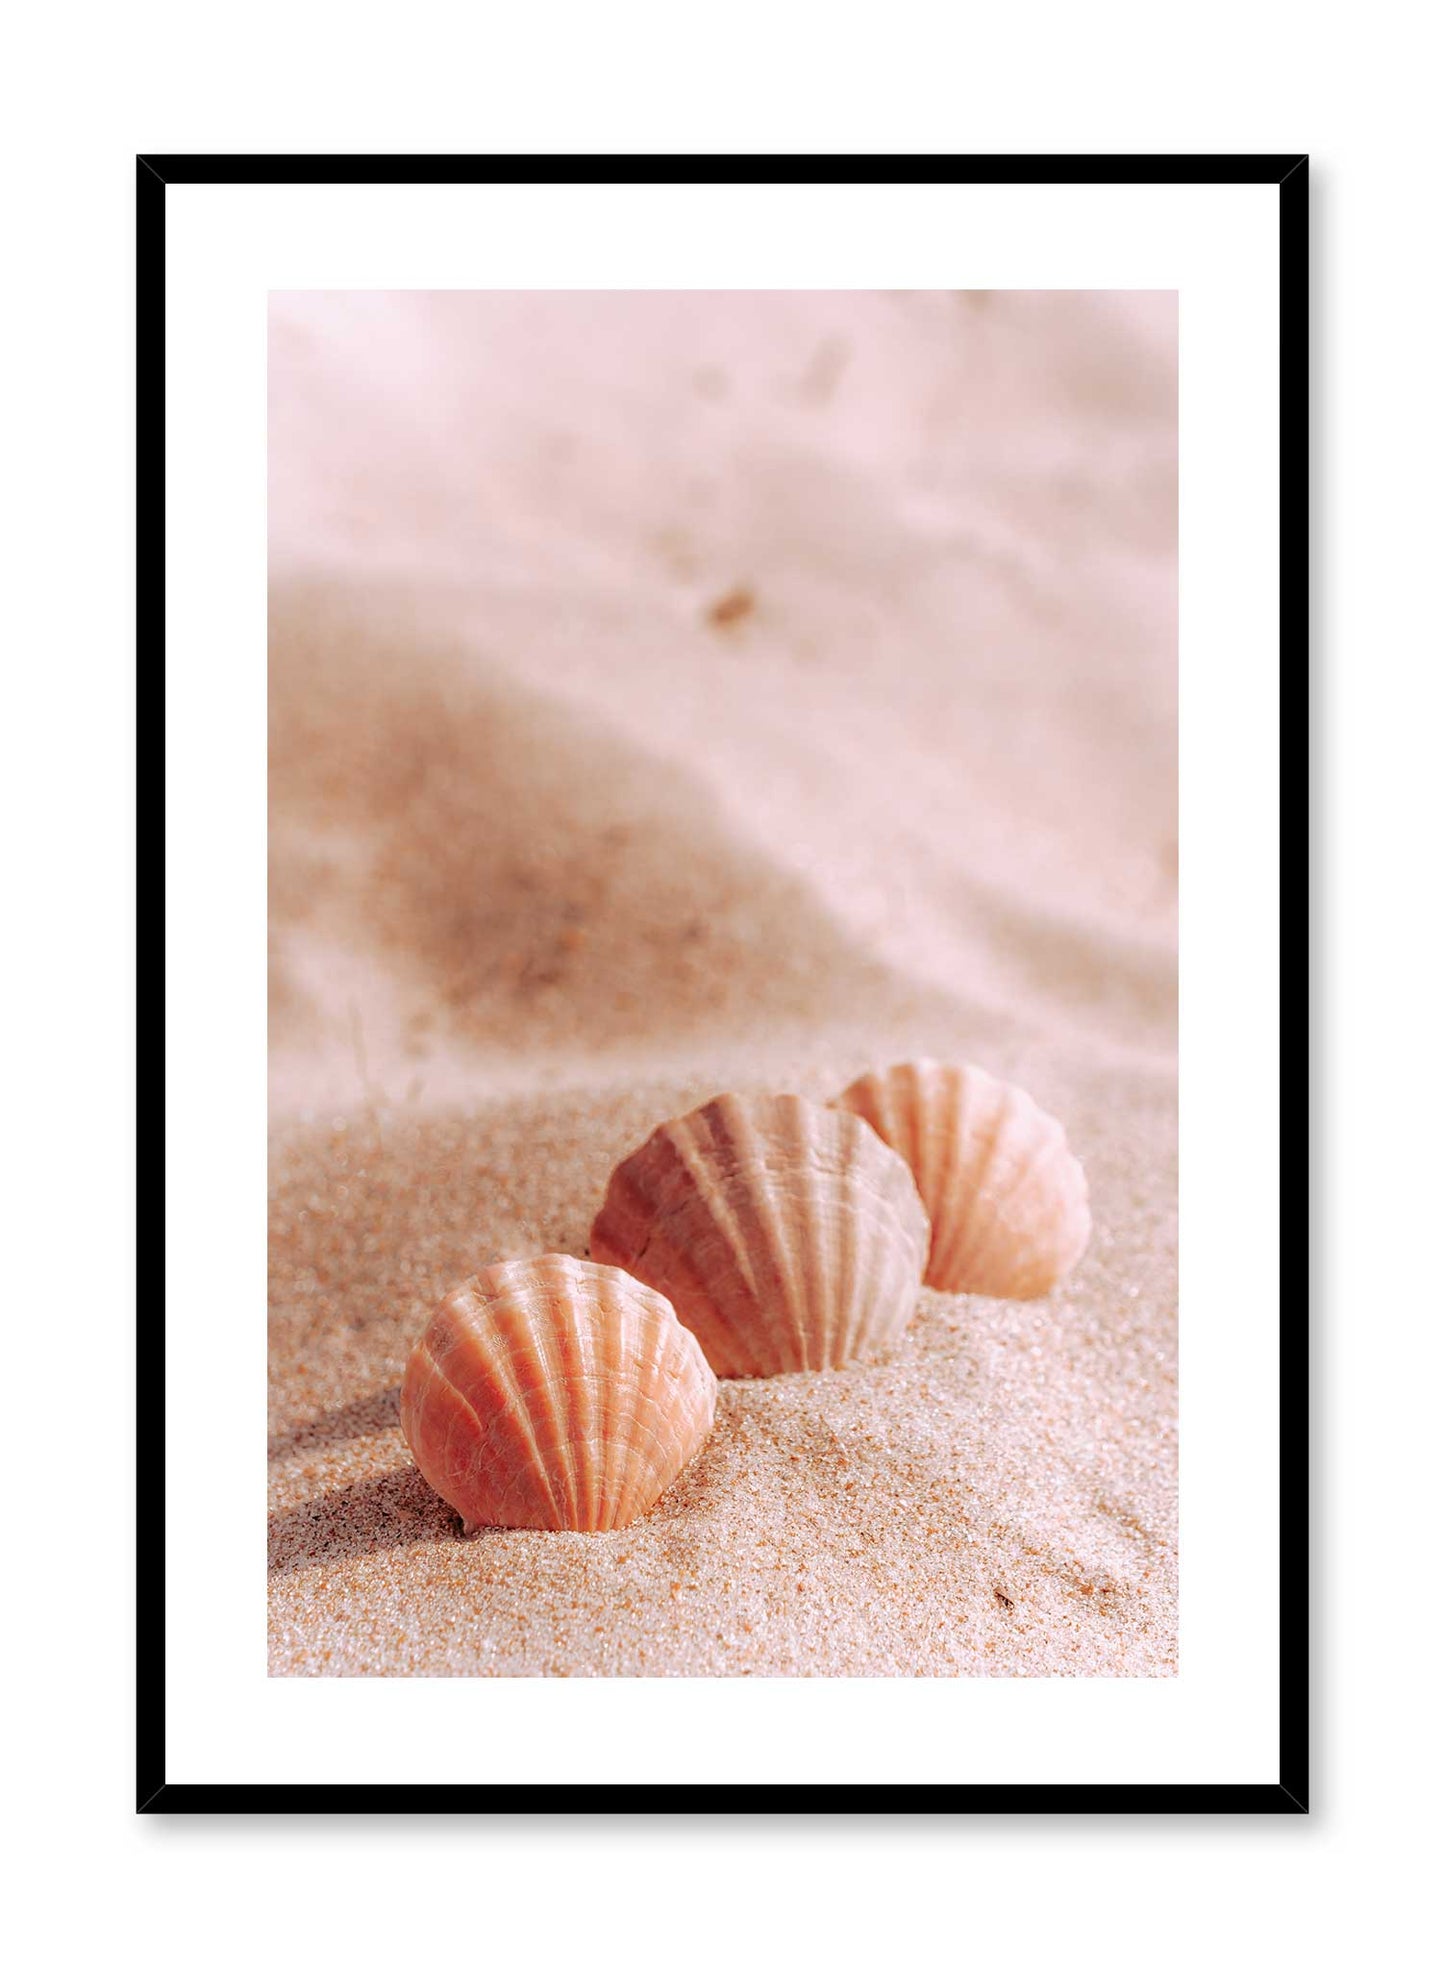 Sweet Seashells is a minimalist photography of three small pink clams on soft beige-pink sand by Opposite Wall.